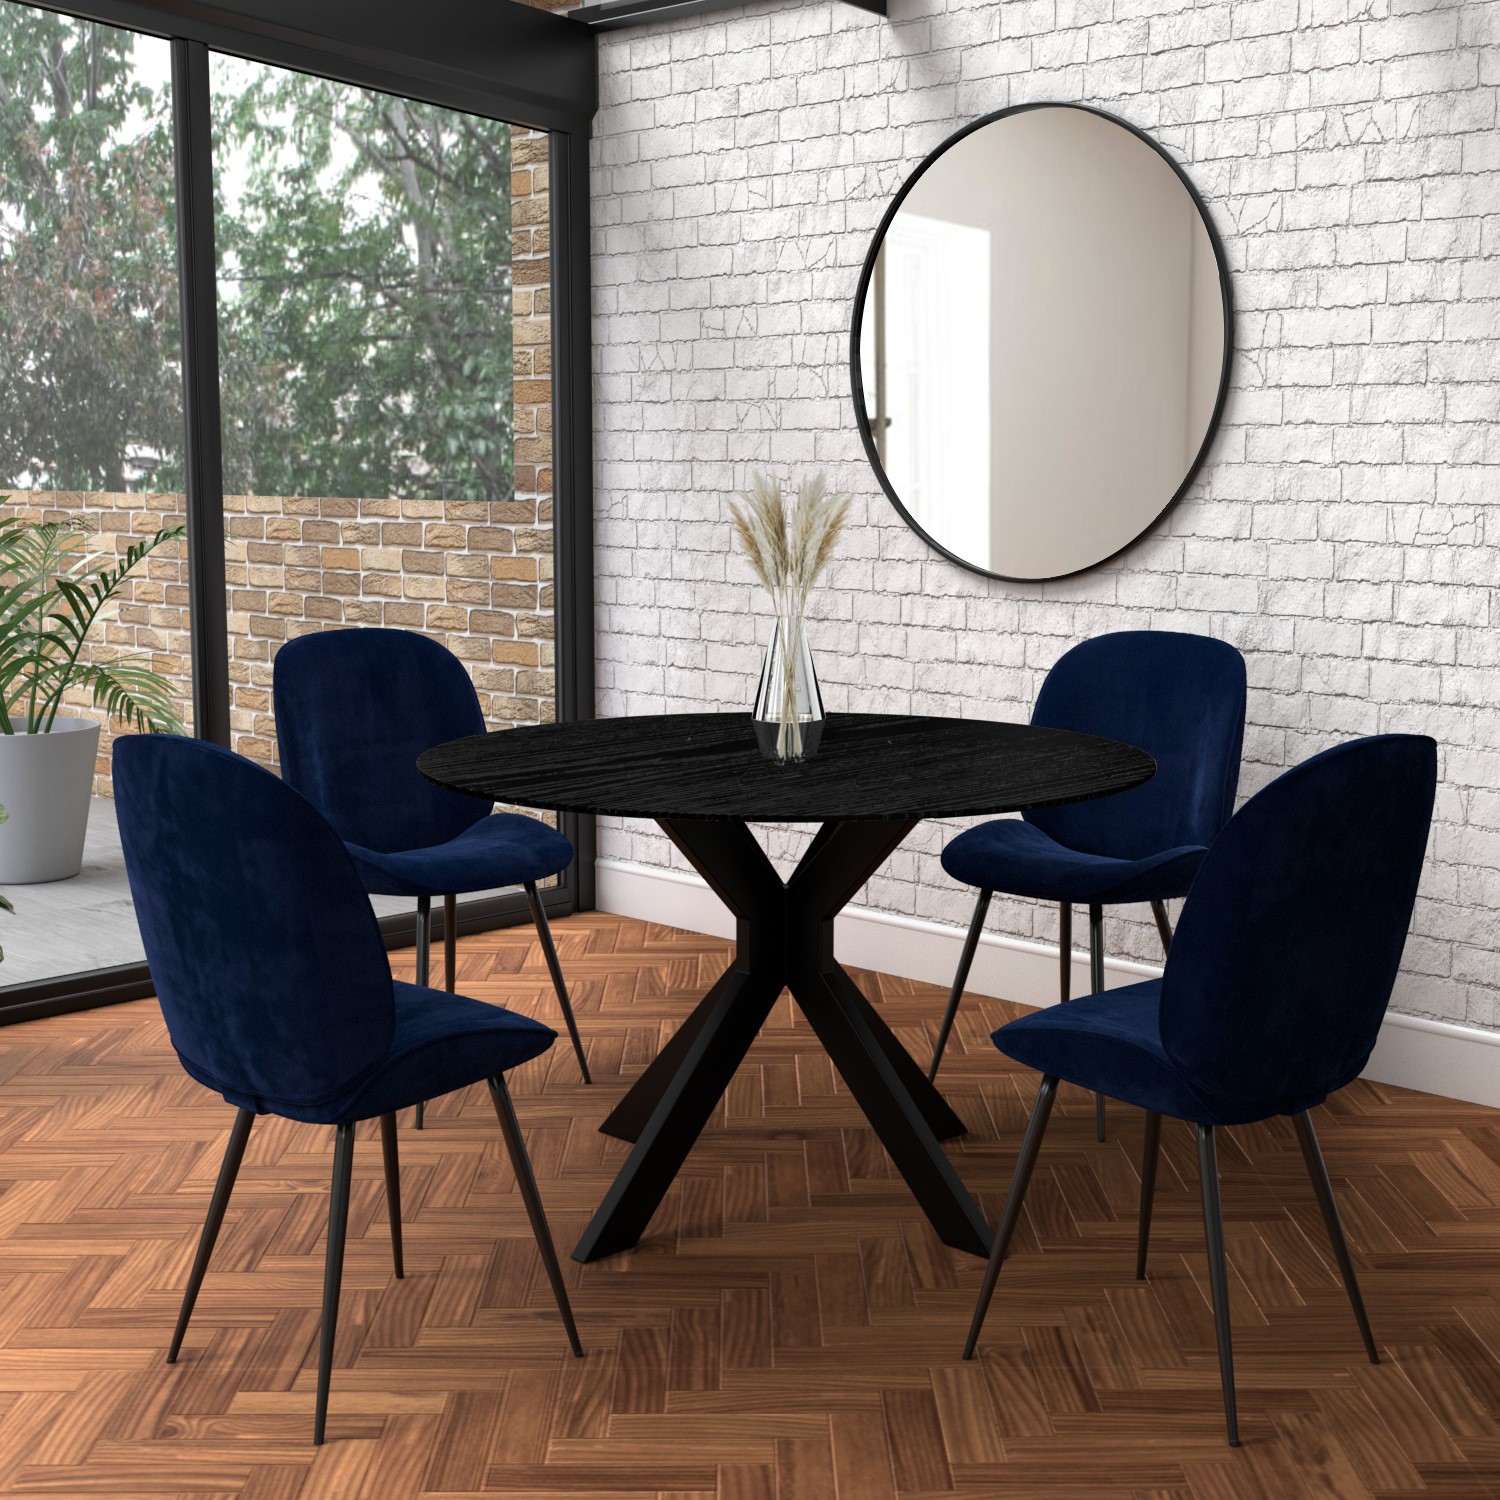 Black Round Drop Leaf Dining Table With, Round Drop Leaf Dining Table And 4 Chairs